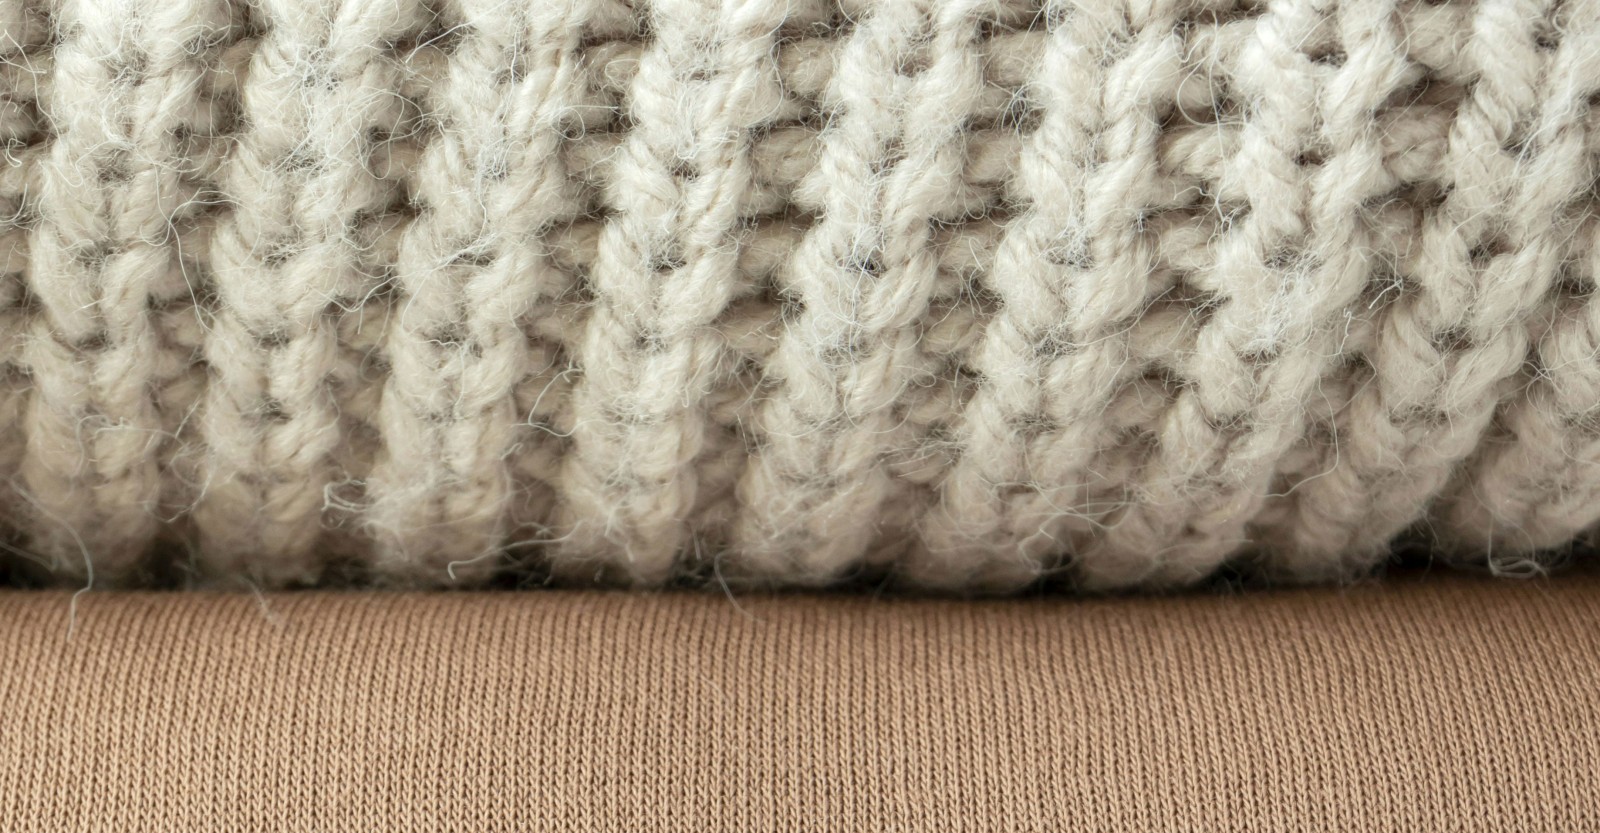 Knitted wool